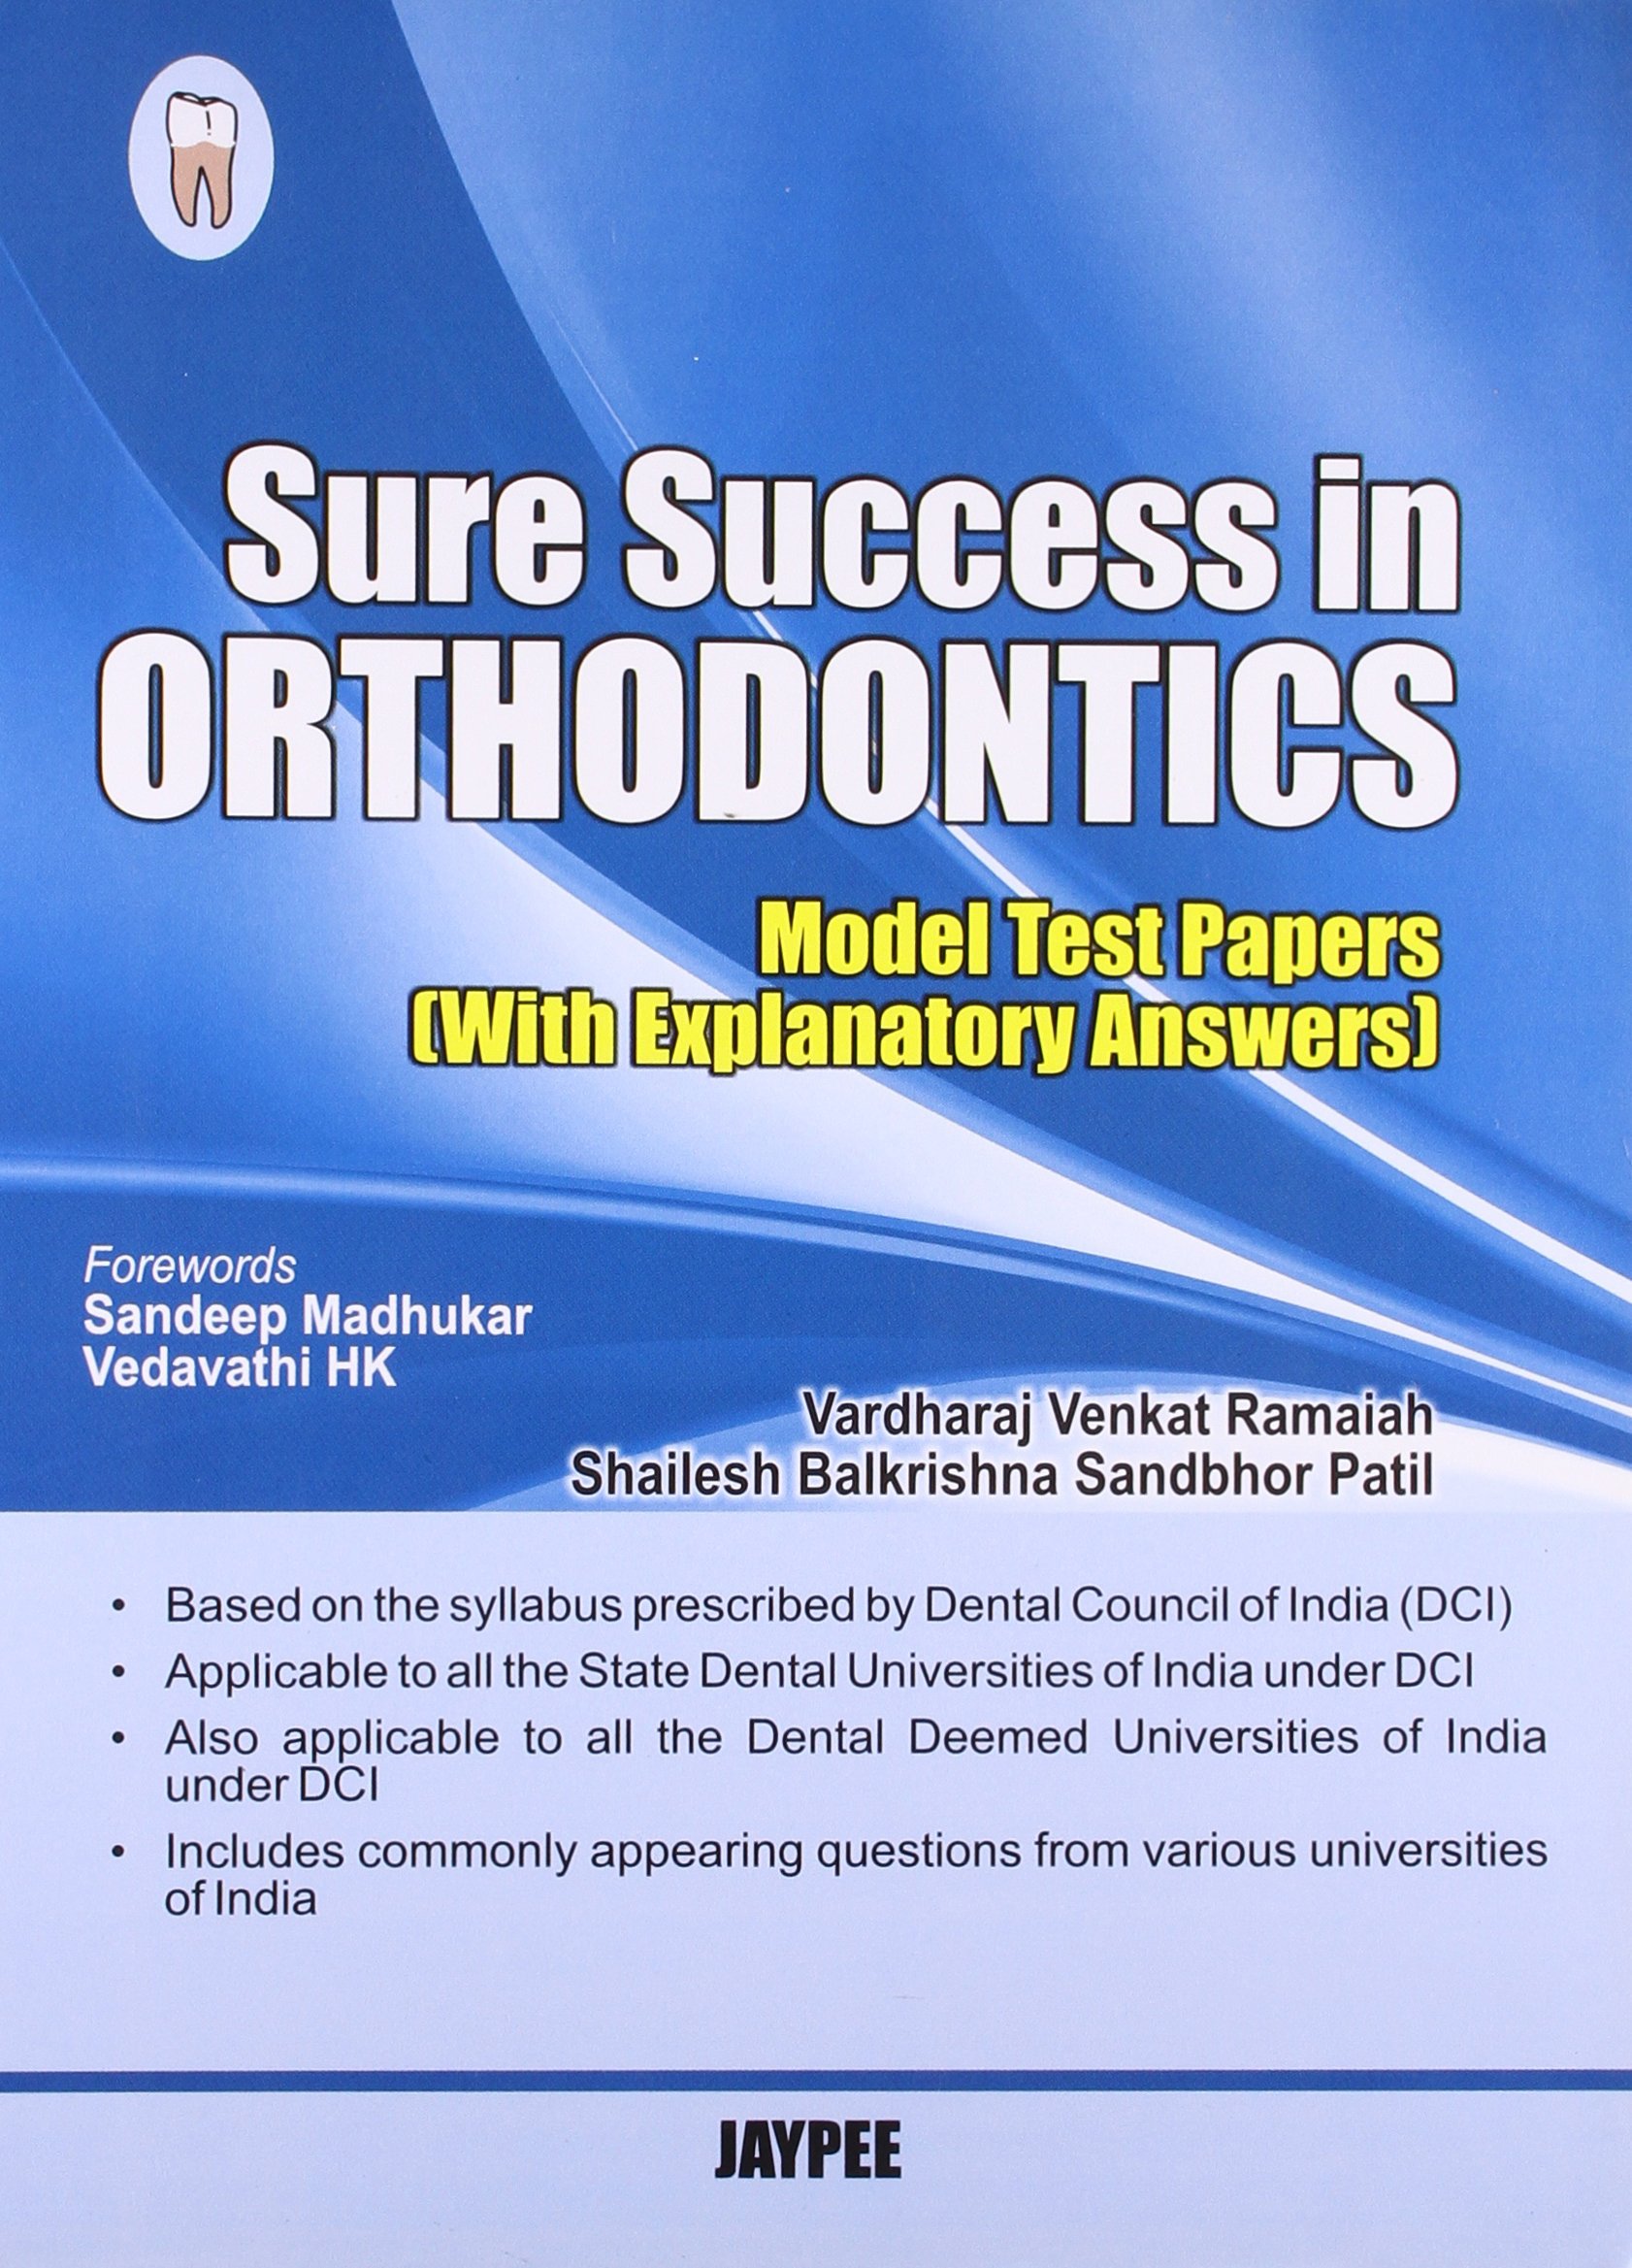 Sure Success In Orthodontics (Model Test Papers With Explanatory Answers)